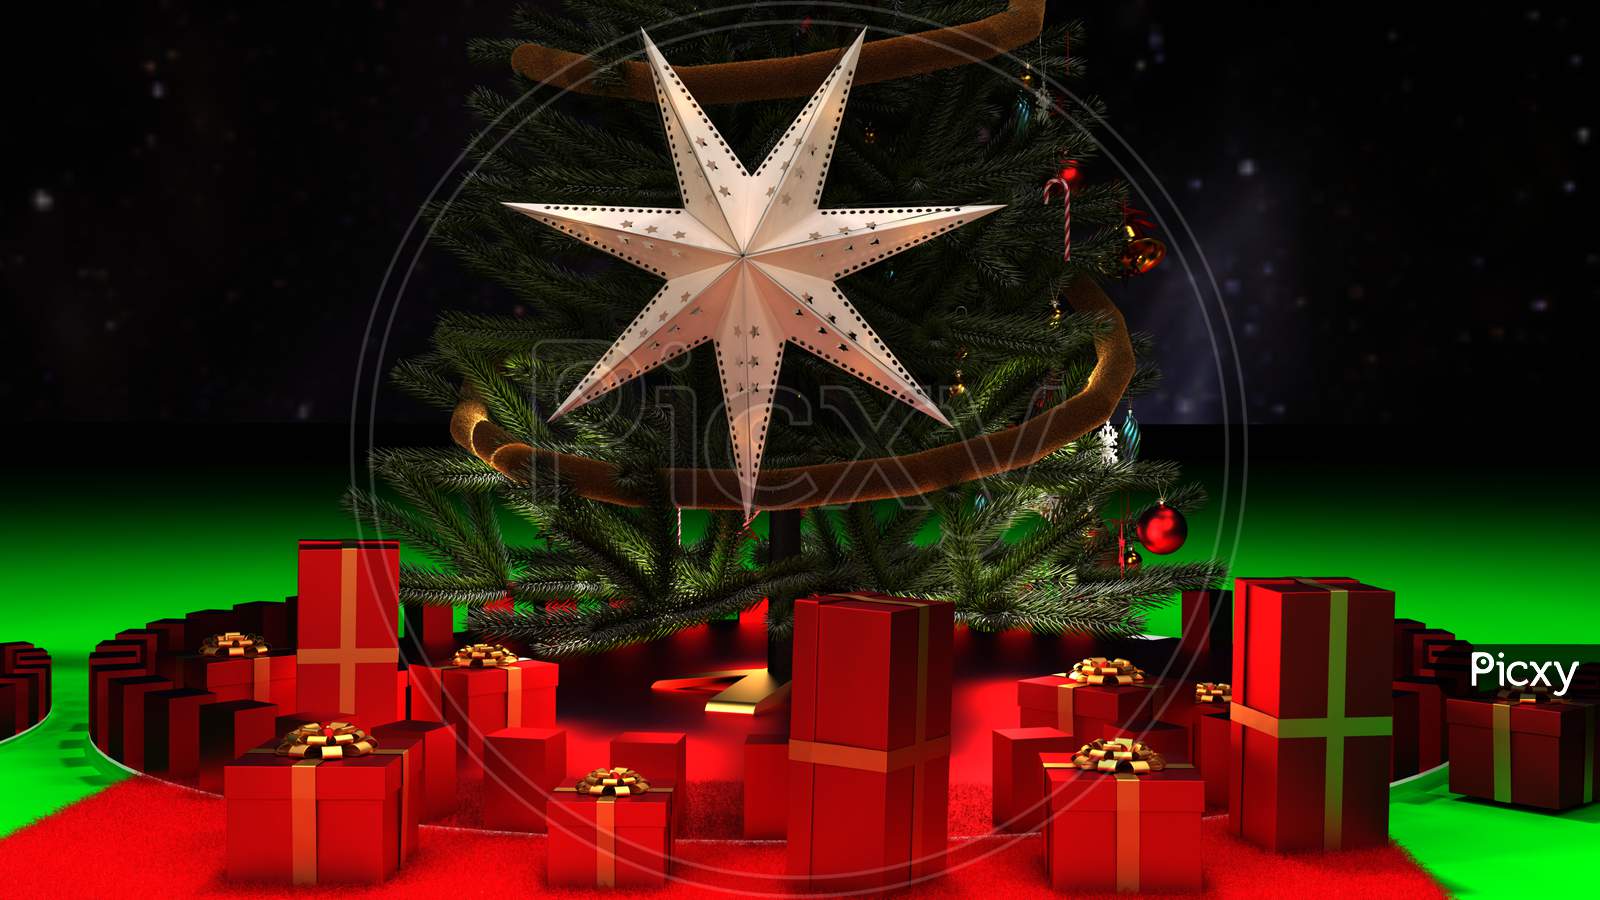 Christmas Decorative Tree With Star And Shiny Red Color Gift Boxes Binding By Gold Ribbon. 3D Render